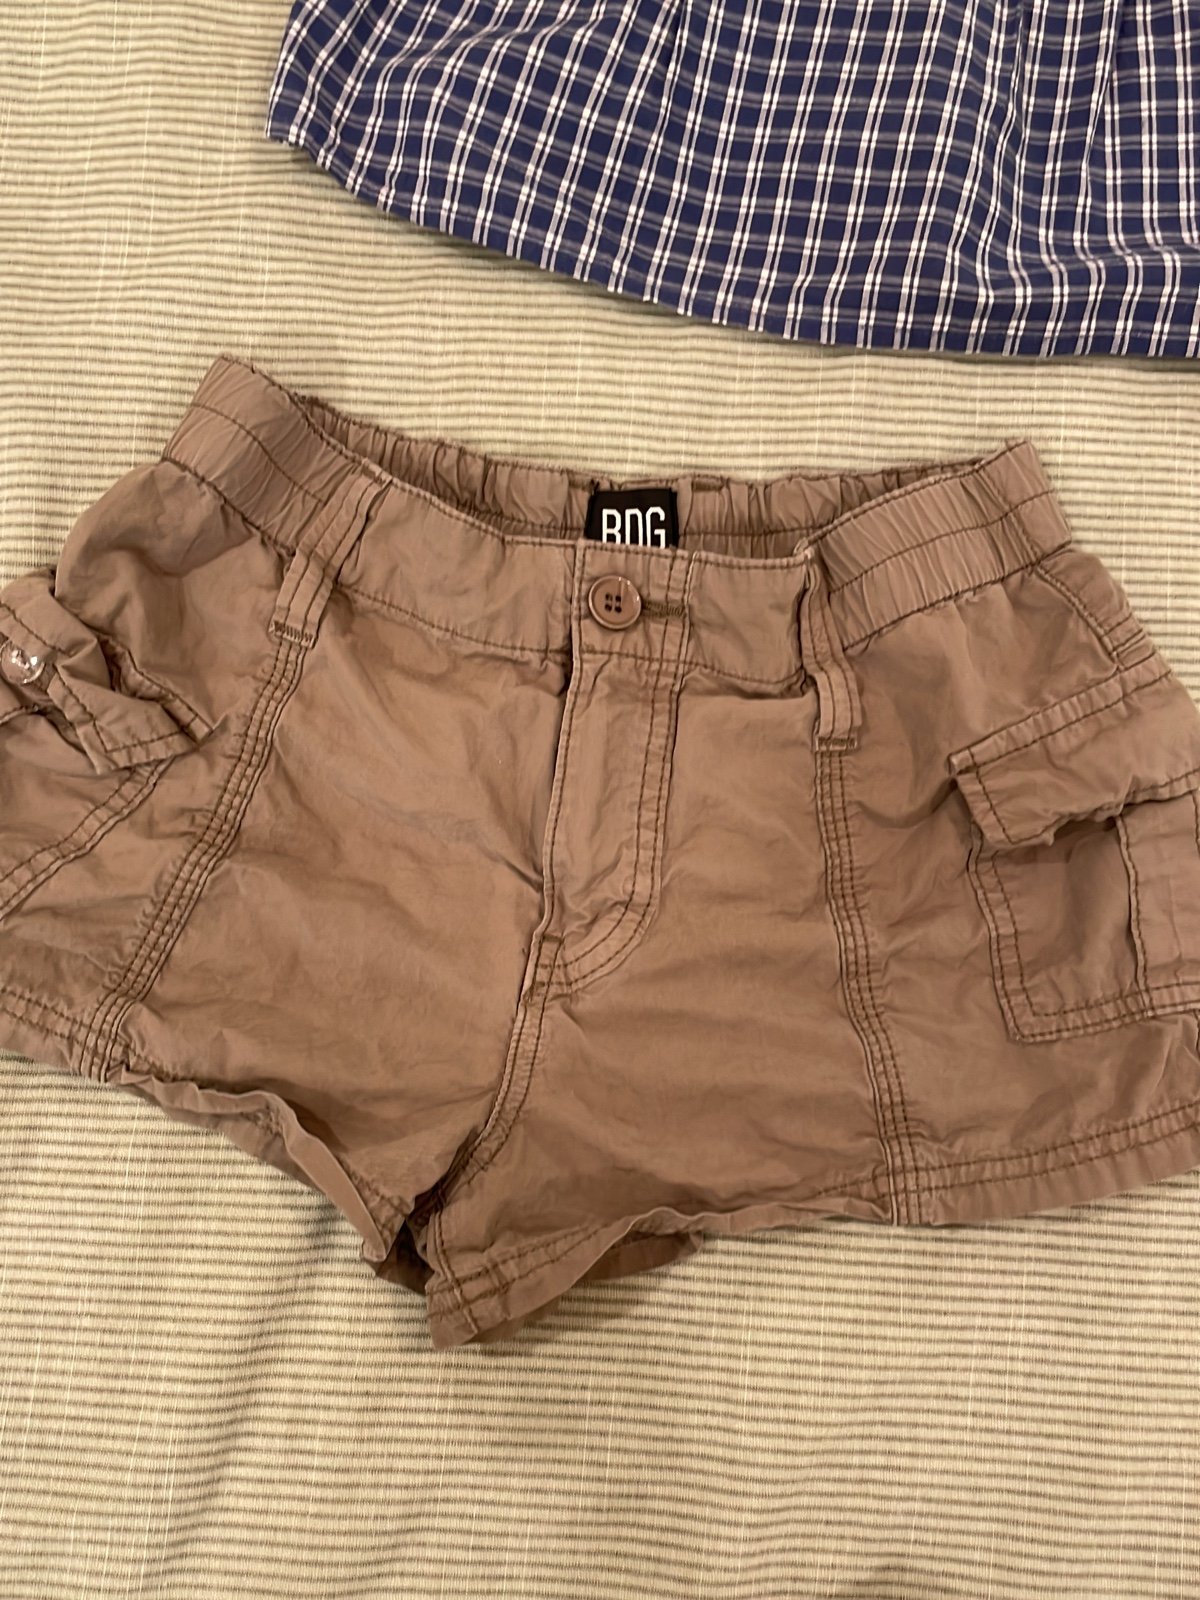 Simple Urban outfitters Bdg cargo shorts GaElVlZcW Fact